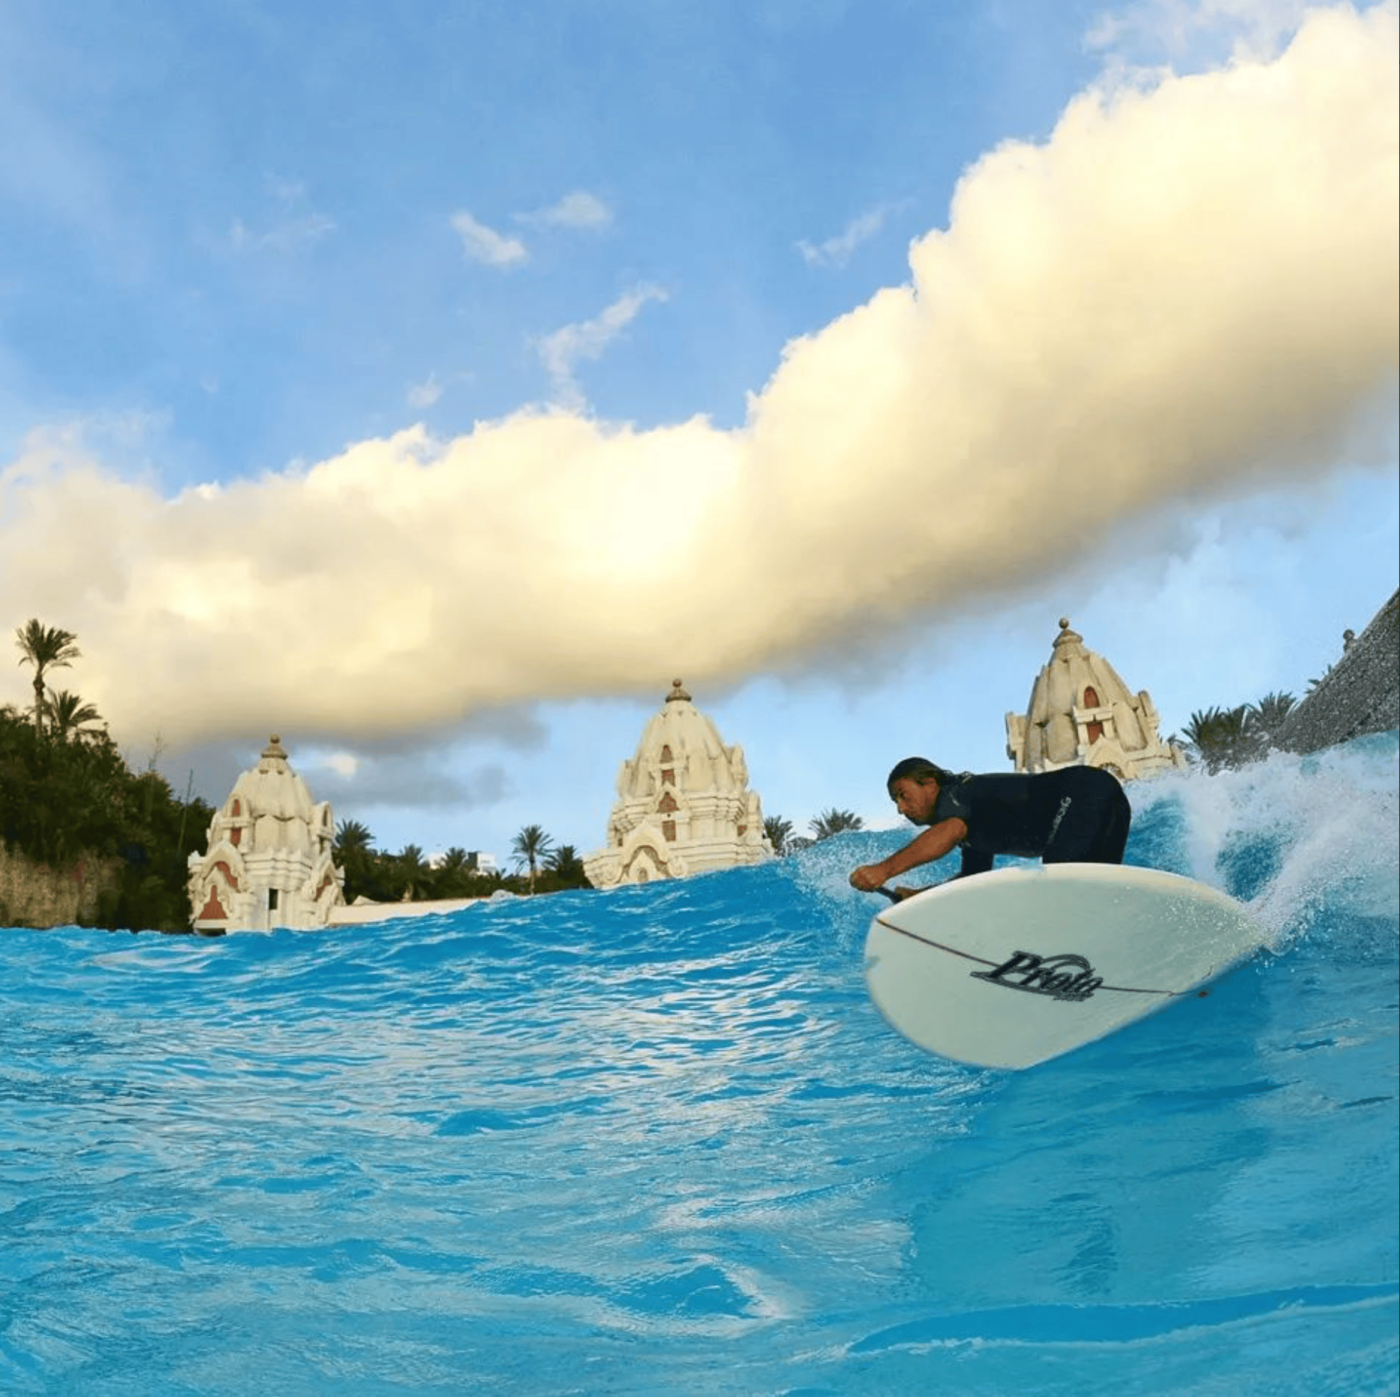 Siam park the wave palace